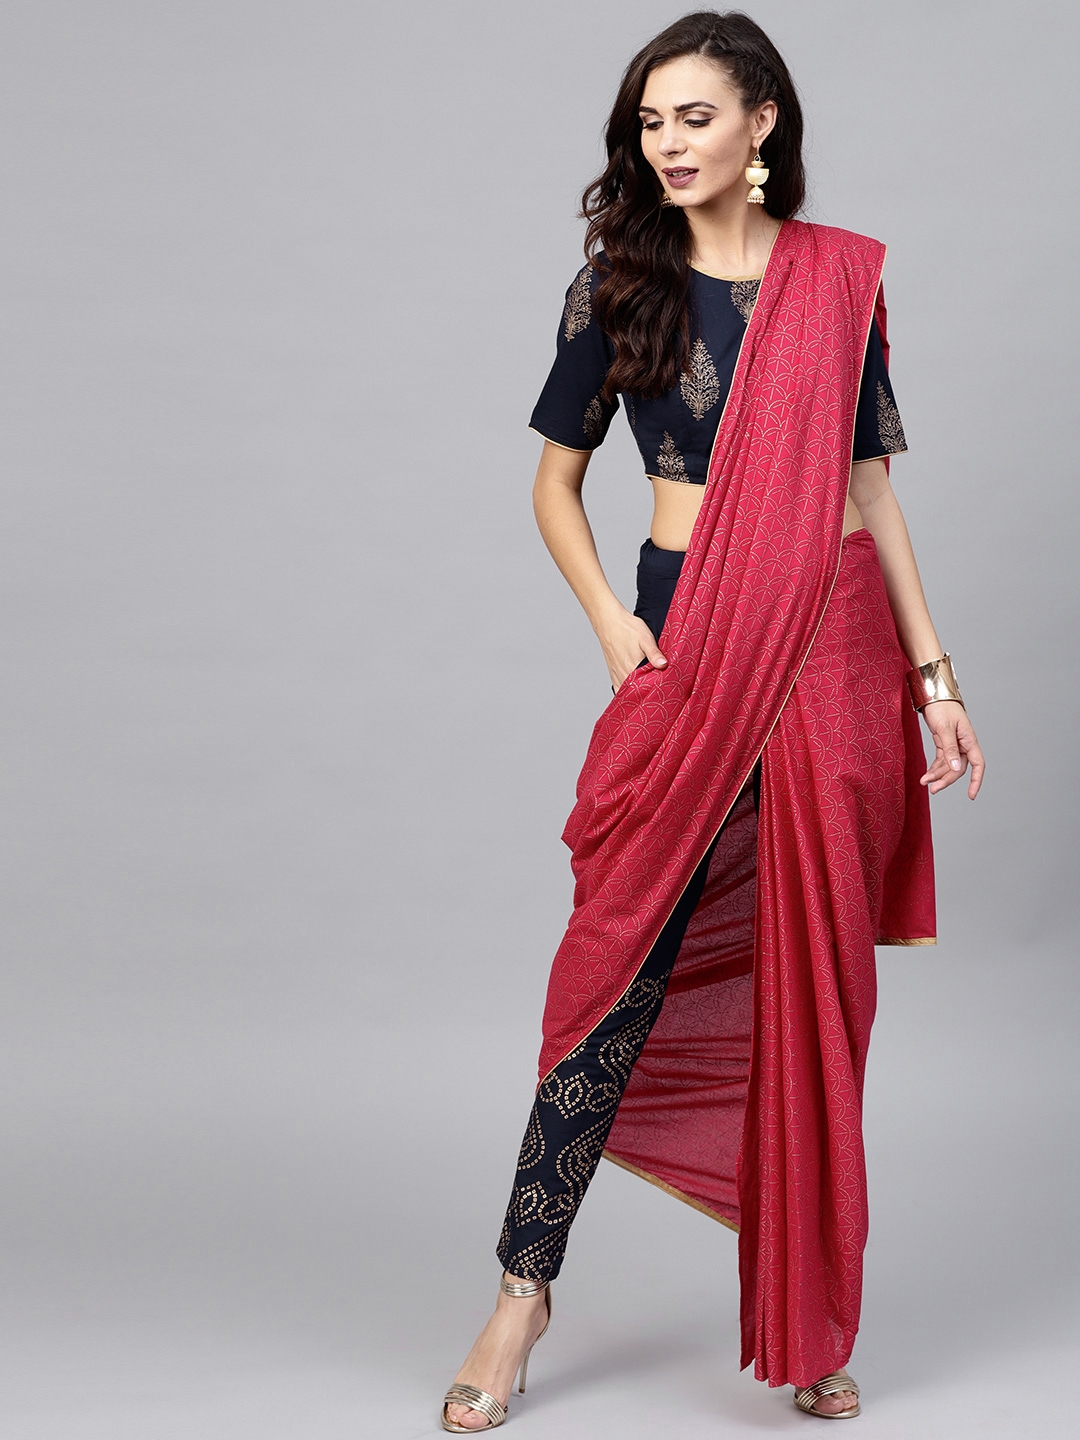 10 Different Trending Saree Draping Styles